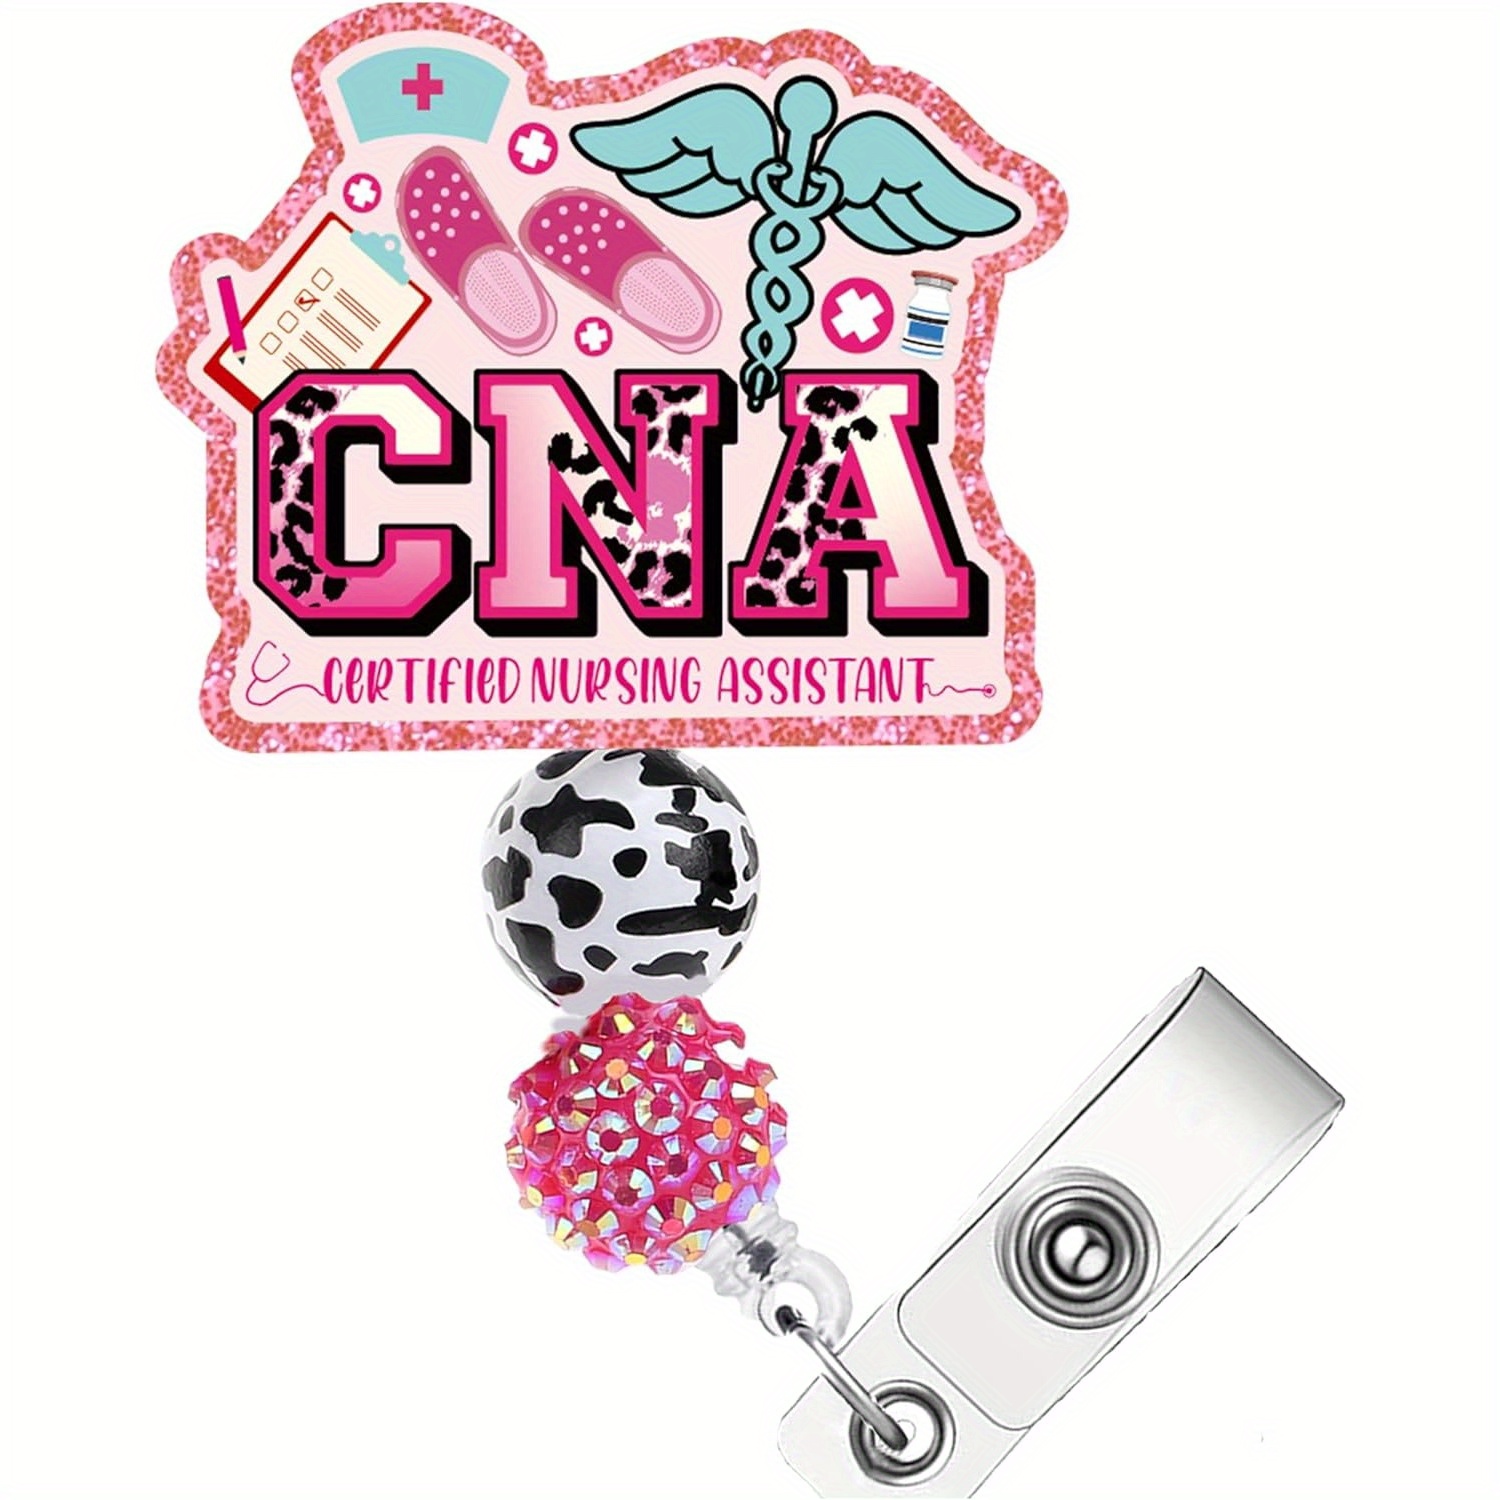 

Certified Nursing Assistant Acrylic Badge Reel - 1pc Retractable Cna Badge Holder With Alligator Clip, Medical Assistant Id Card Accessory, Hospital Staff Work Identification Charm